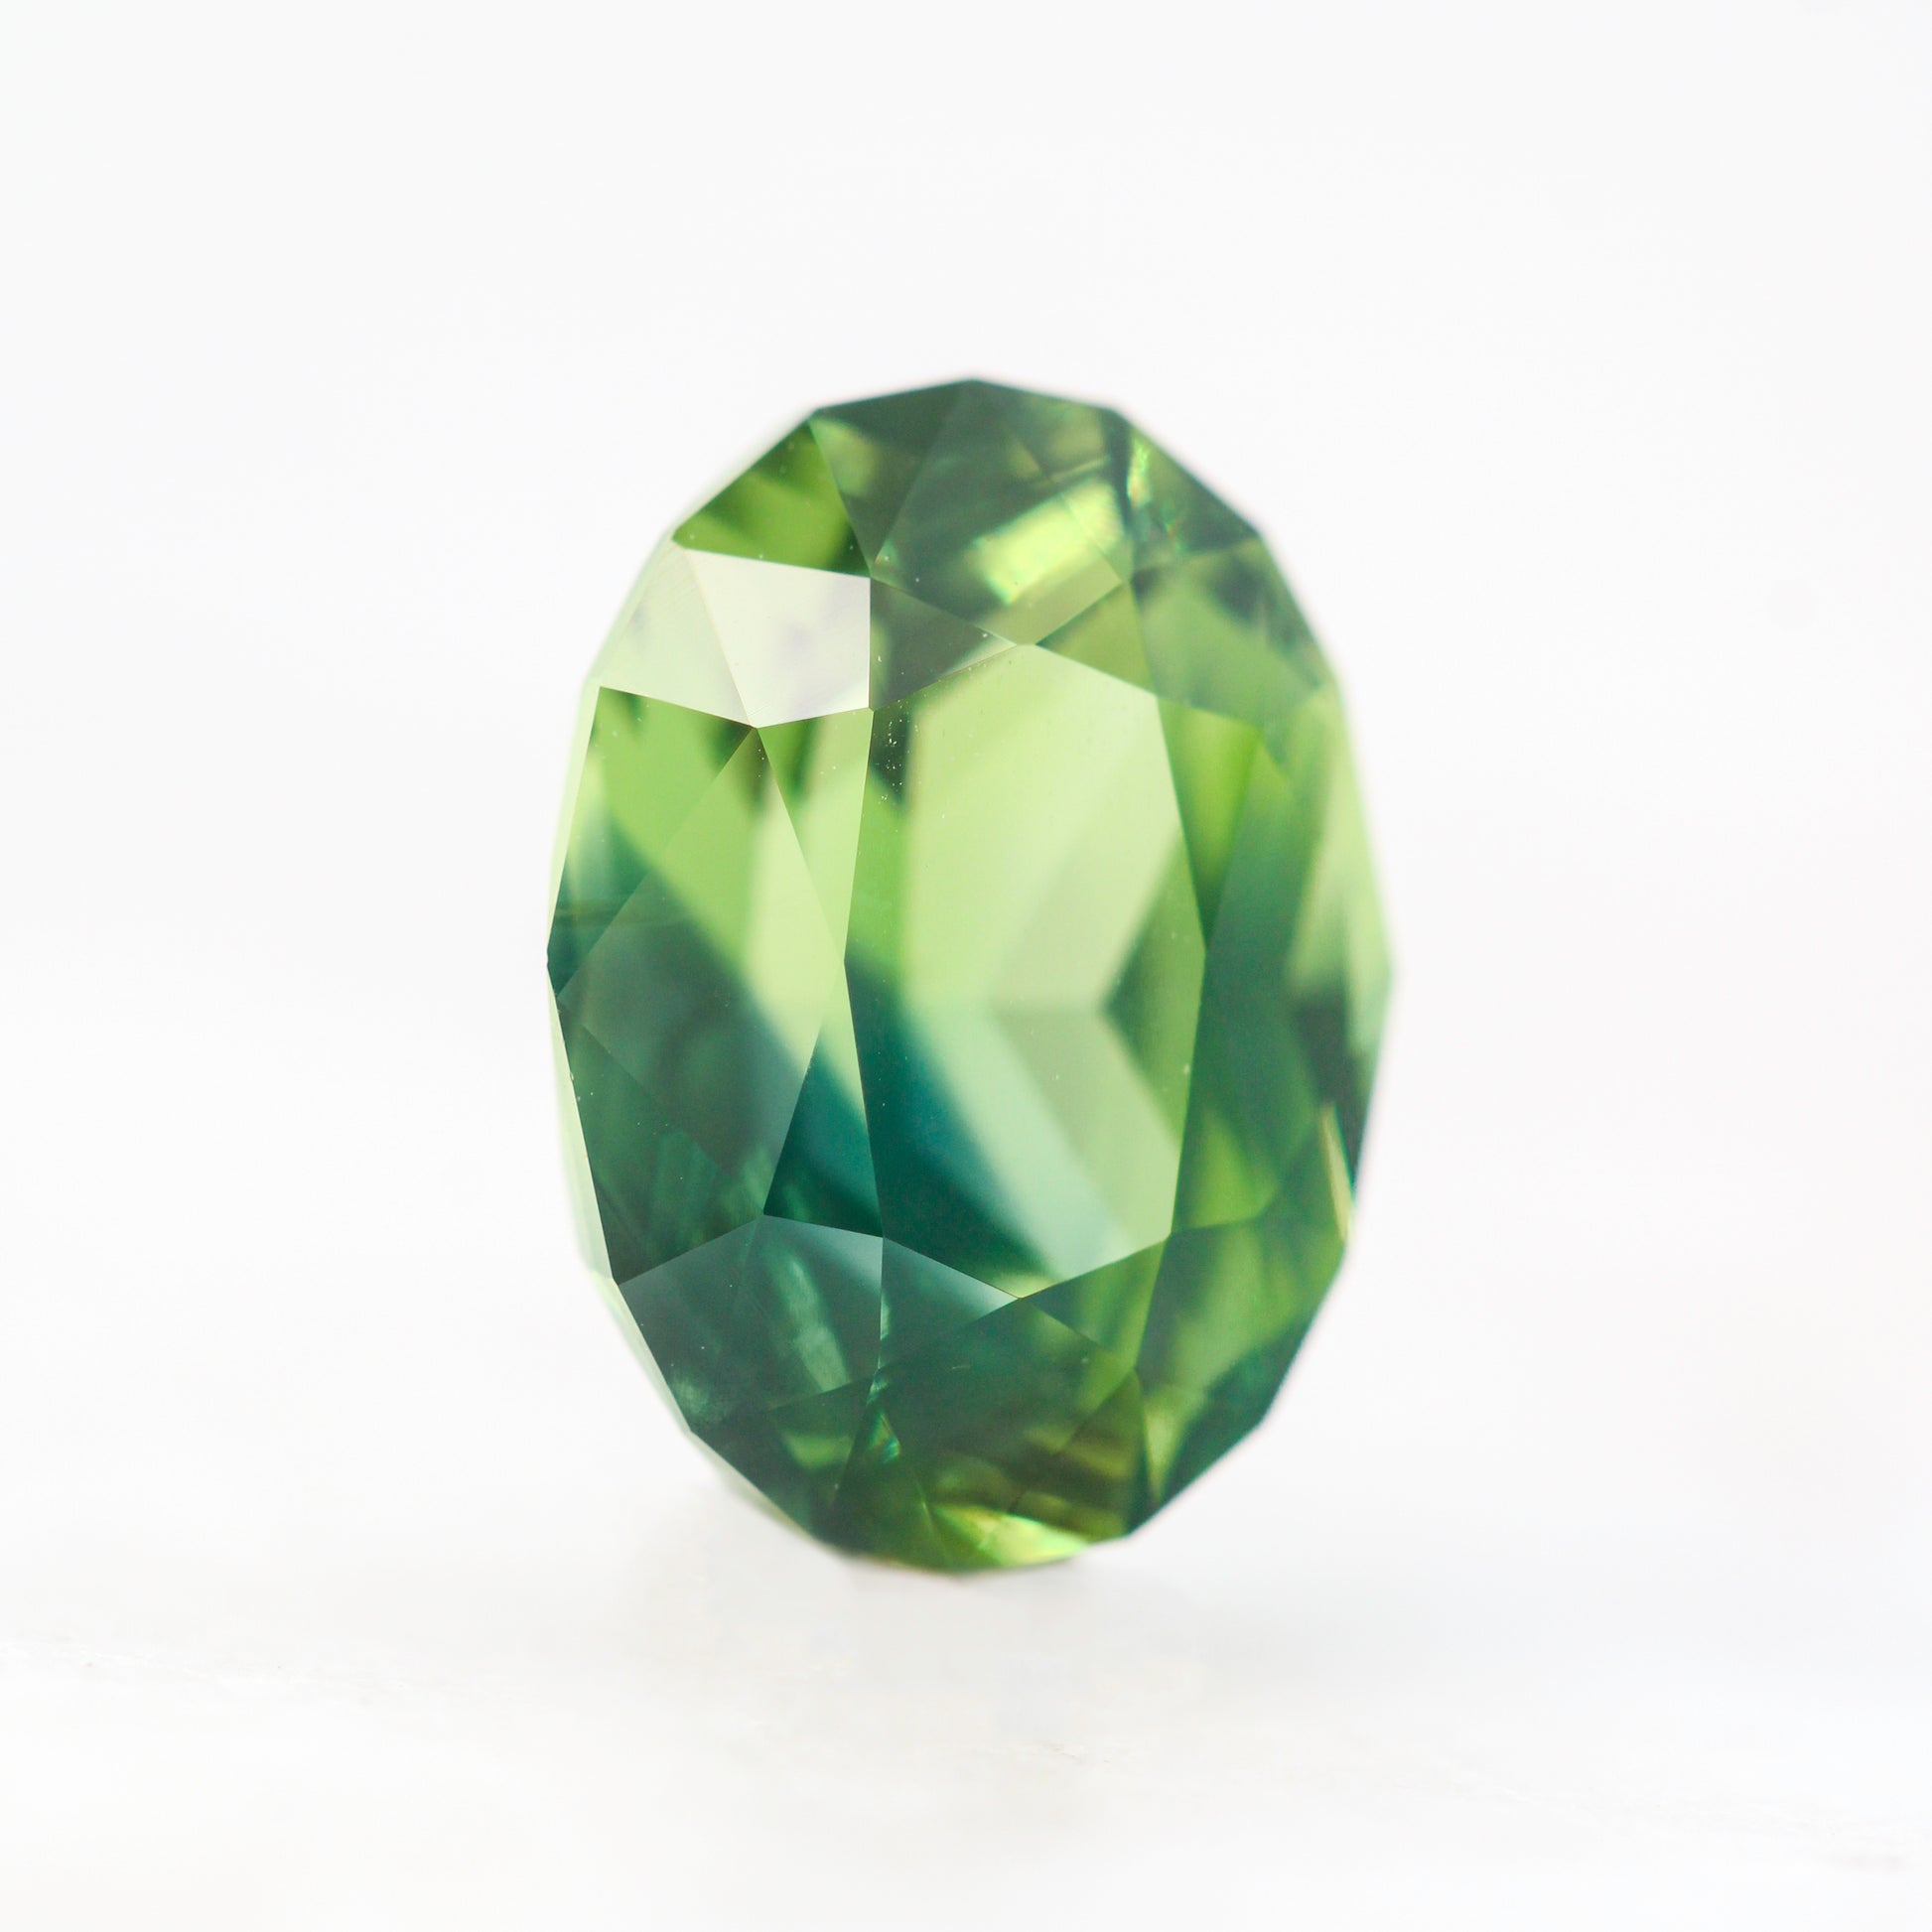 4.00 Carat Parti Green Geometric Oval Sapphire for Custom Work - Inventory Code GGOS400 - Midwinter Co. Alternative Bridal Rings and Modern Fine Jewelry